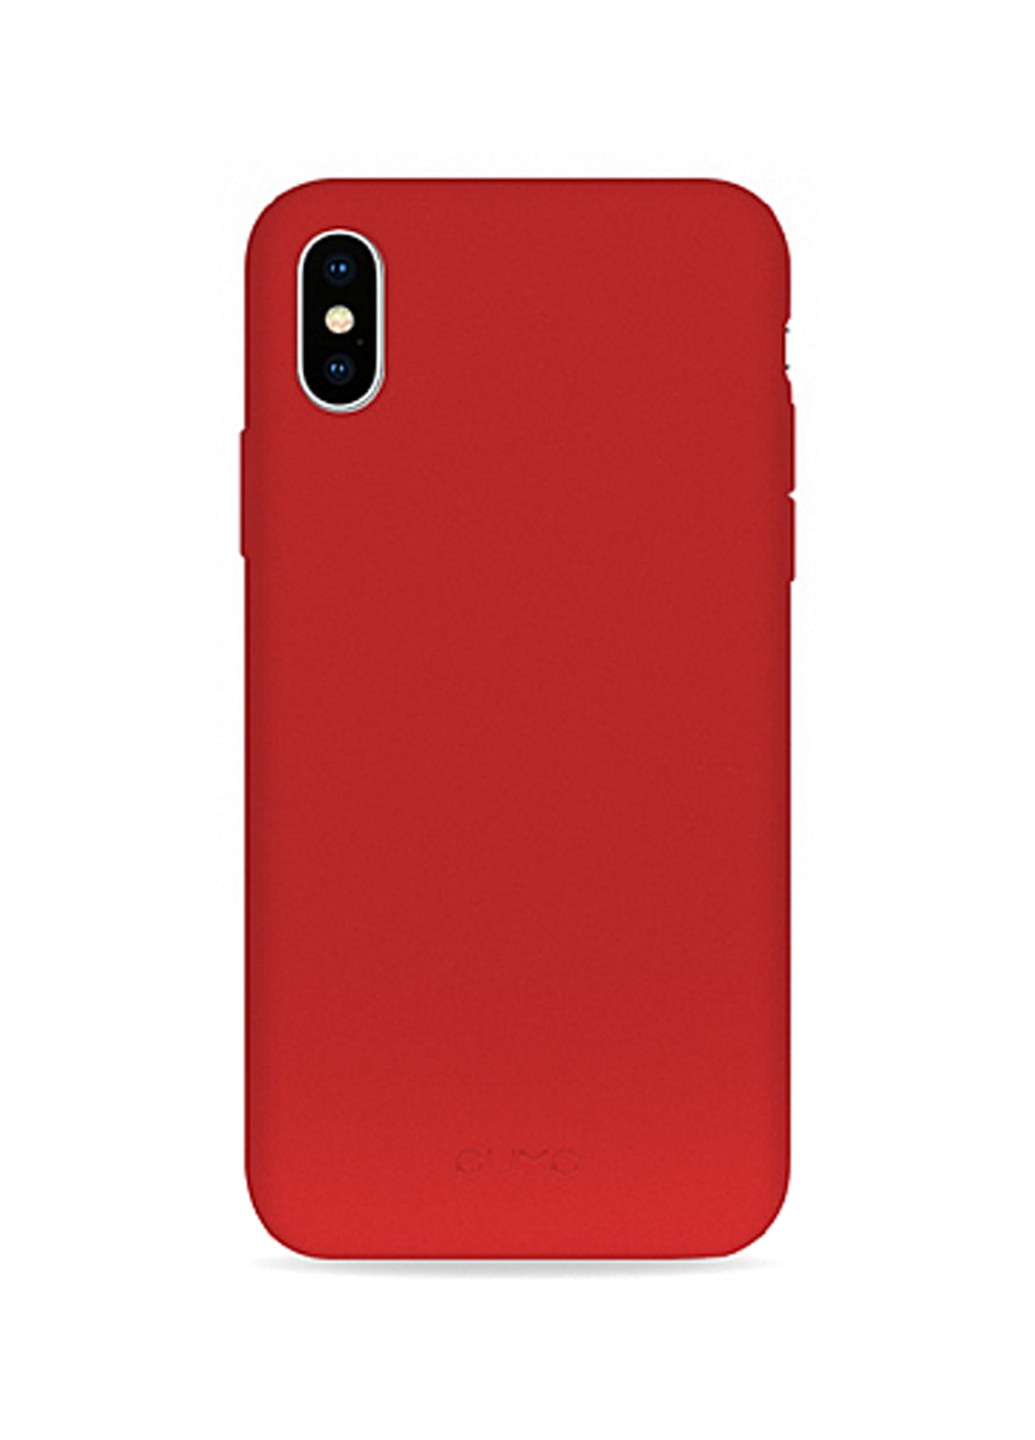 Чехол Silicone Case for iPhone X/XS Red Pump silicone case для iphone x/xs red (136993709)